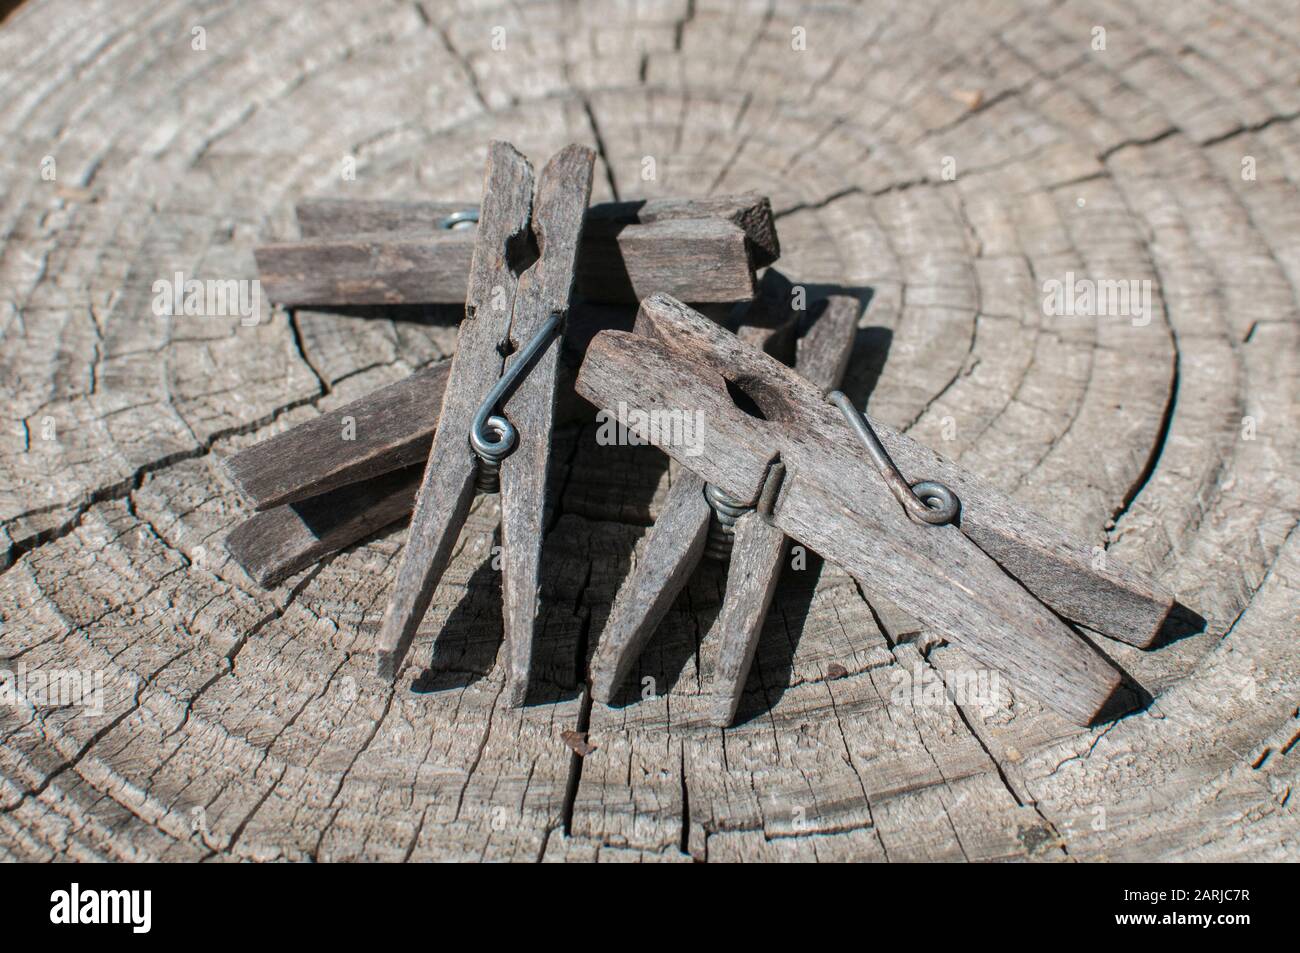 Pile of weathered wooden laundry clamps closeup Stock Photo